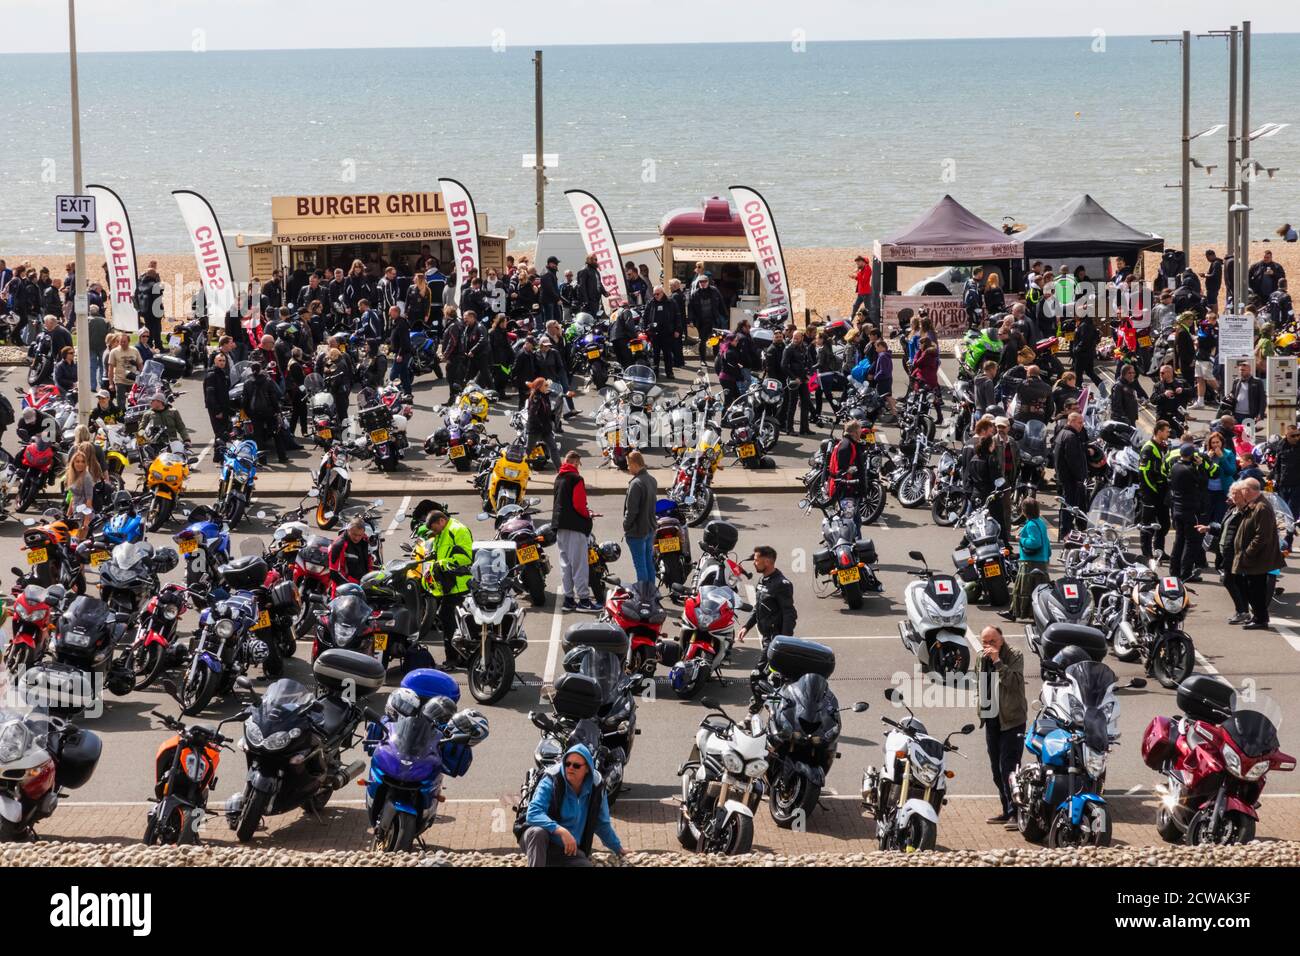 England, East Sussex, Hastings, Hastings Seafront, Motorcycle Rally Stock Photo